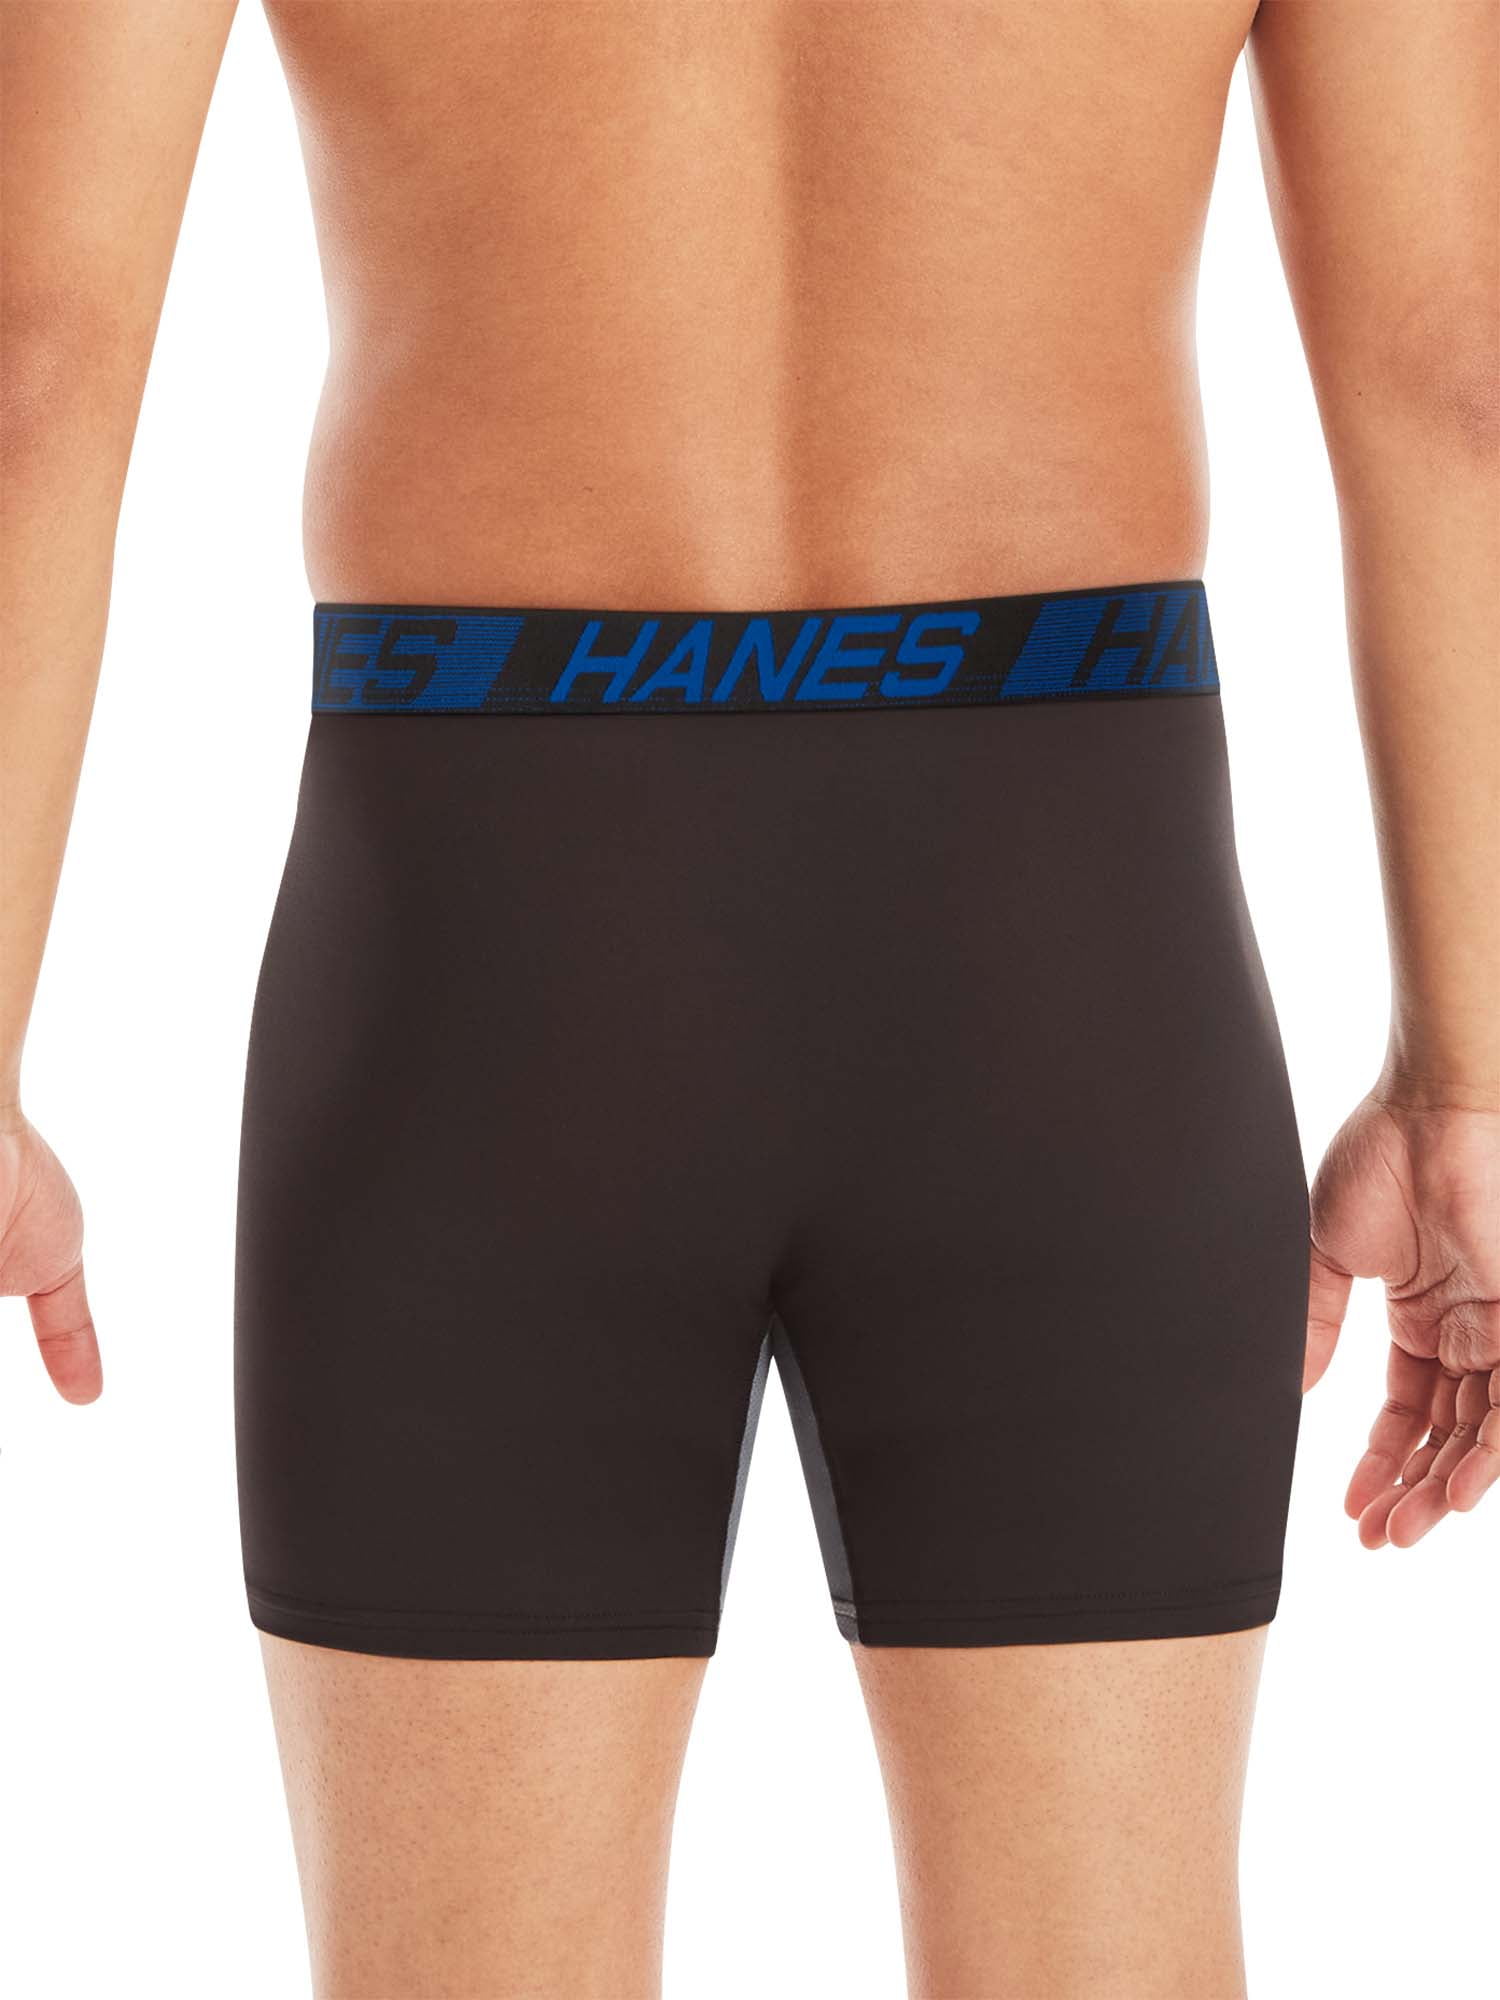 Hanes X-Temp Total Support Pouch Men's Boxer Briefs, Anti-Chafing Underwear,  3-Pack 